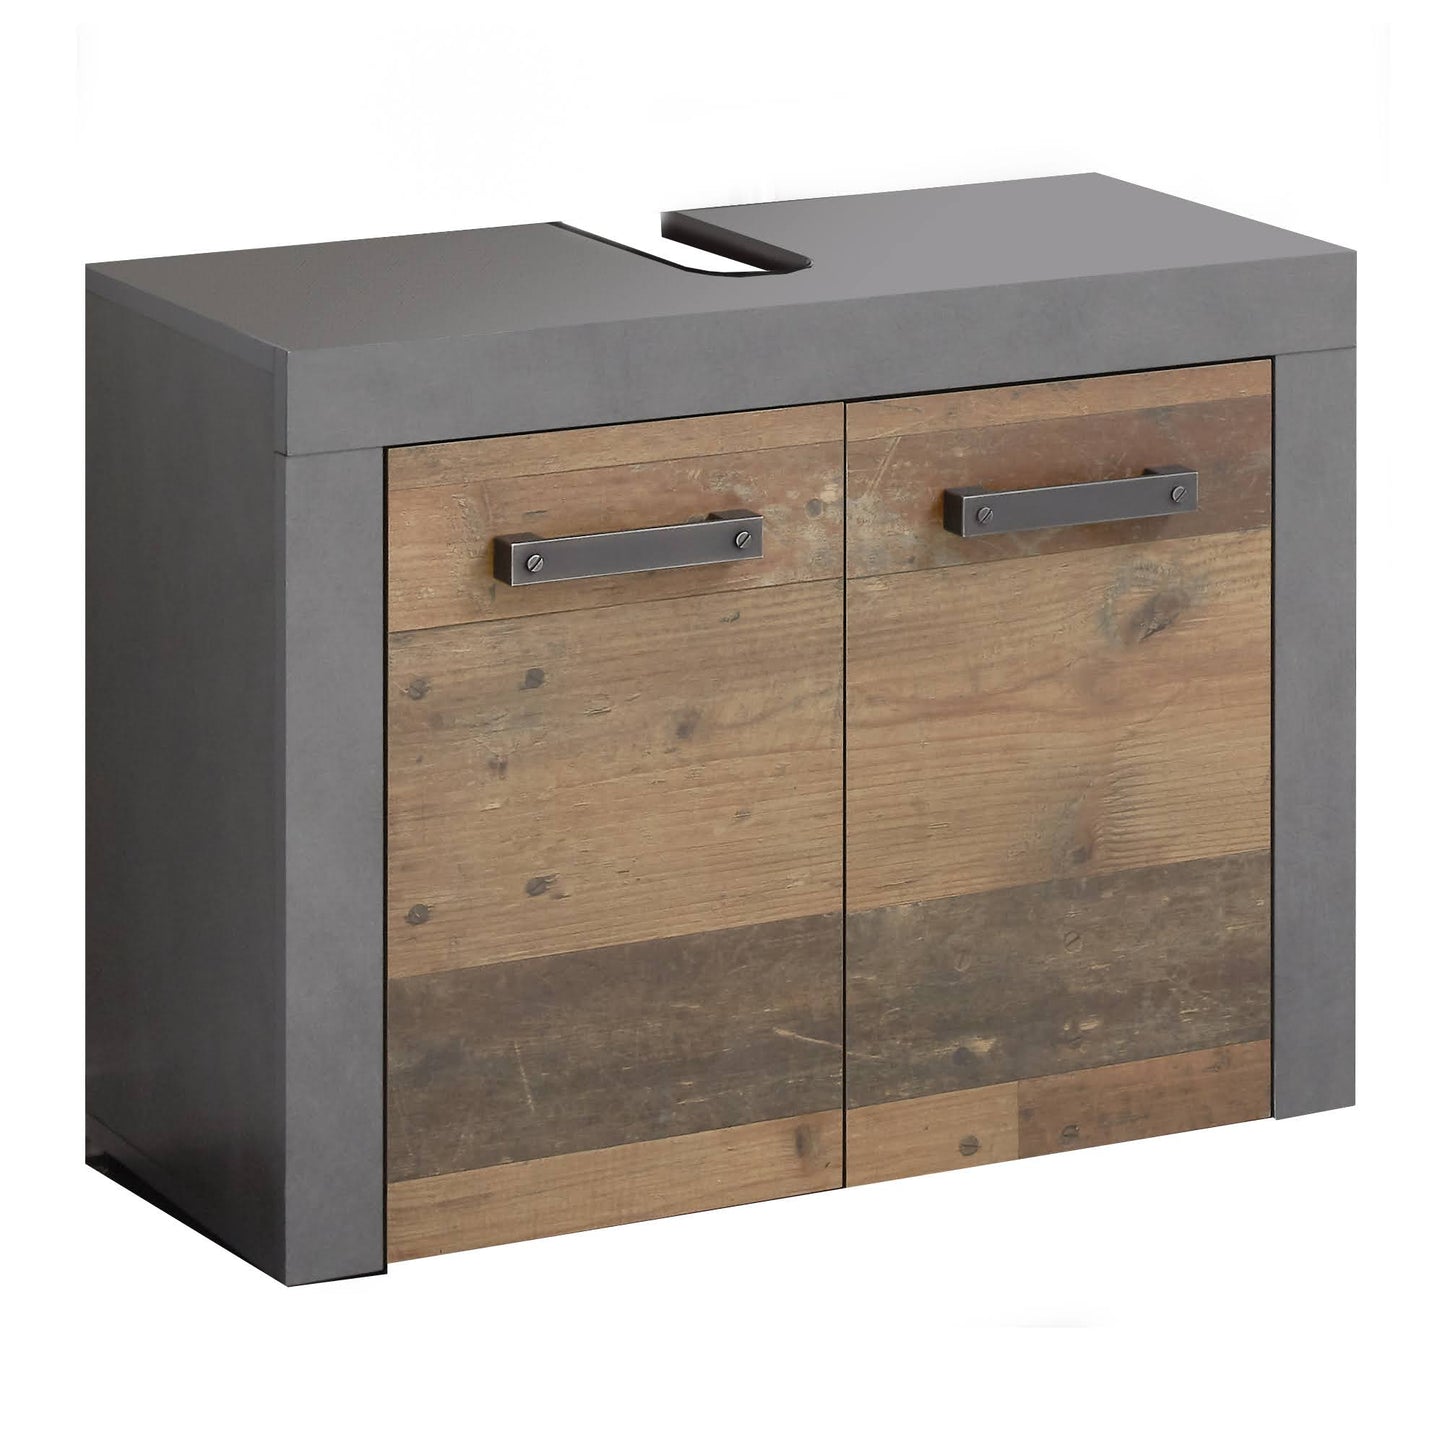 Nancy's Chicalote Bathroom Cabinet - Washbasin Cabinet - Brown and Gray - 72 x 56 x 34 cm